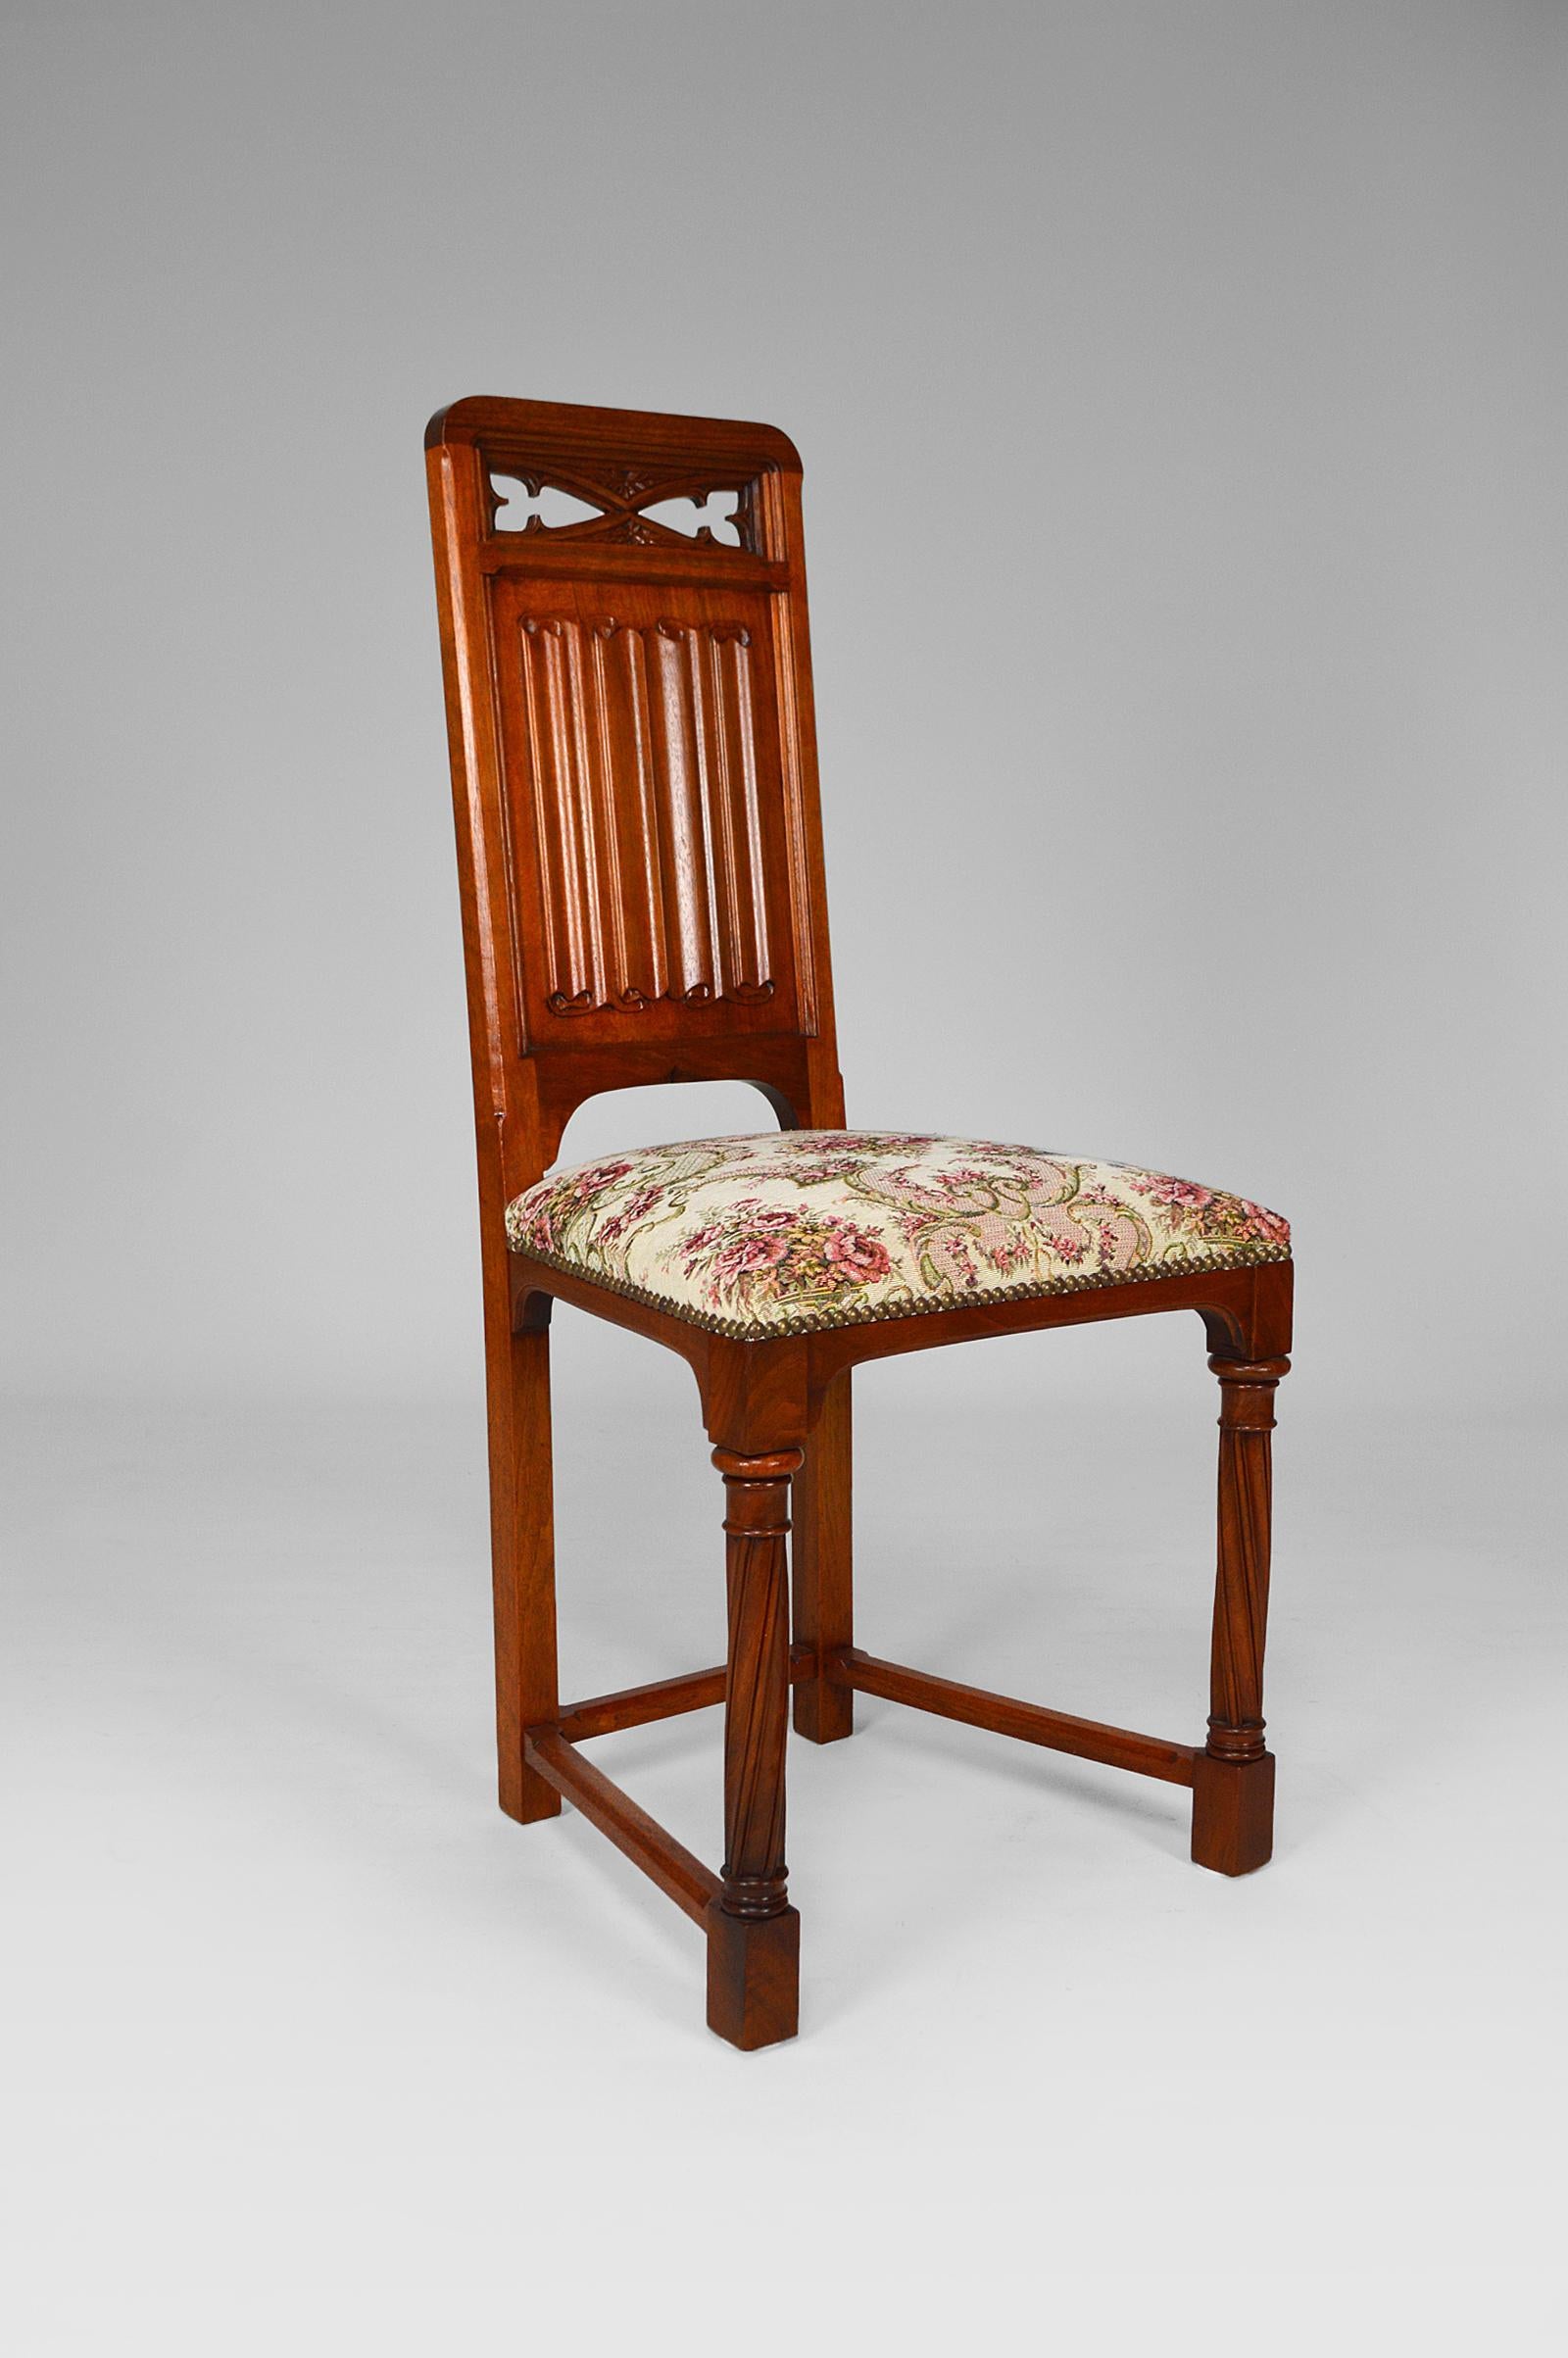 Pair of Antique Victorian Gothic Revival Chairs in Carved Walnut, 19th Century For Sale 7